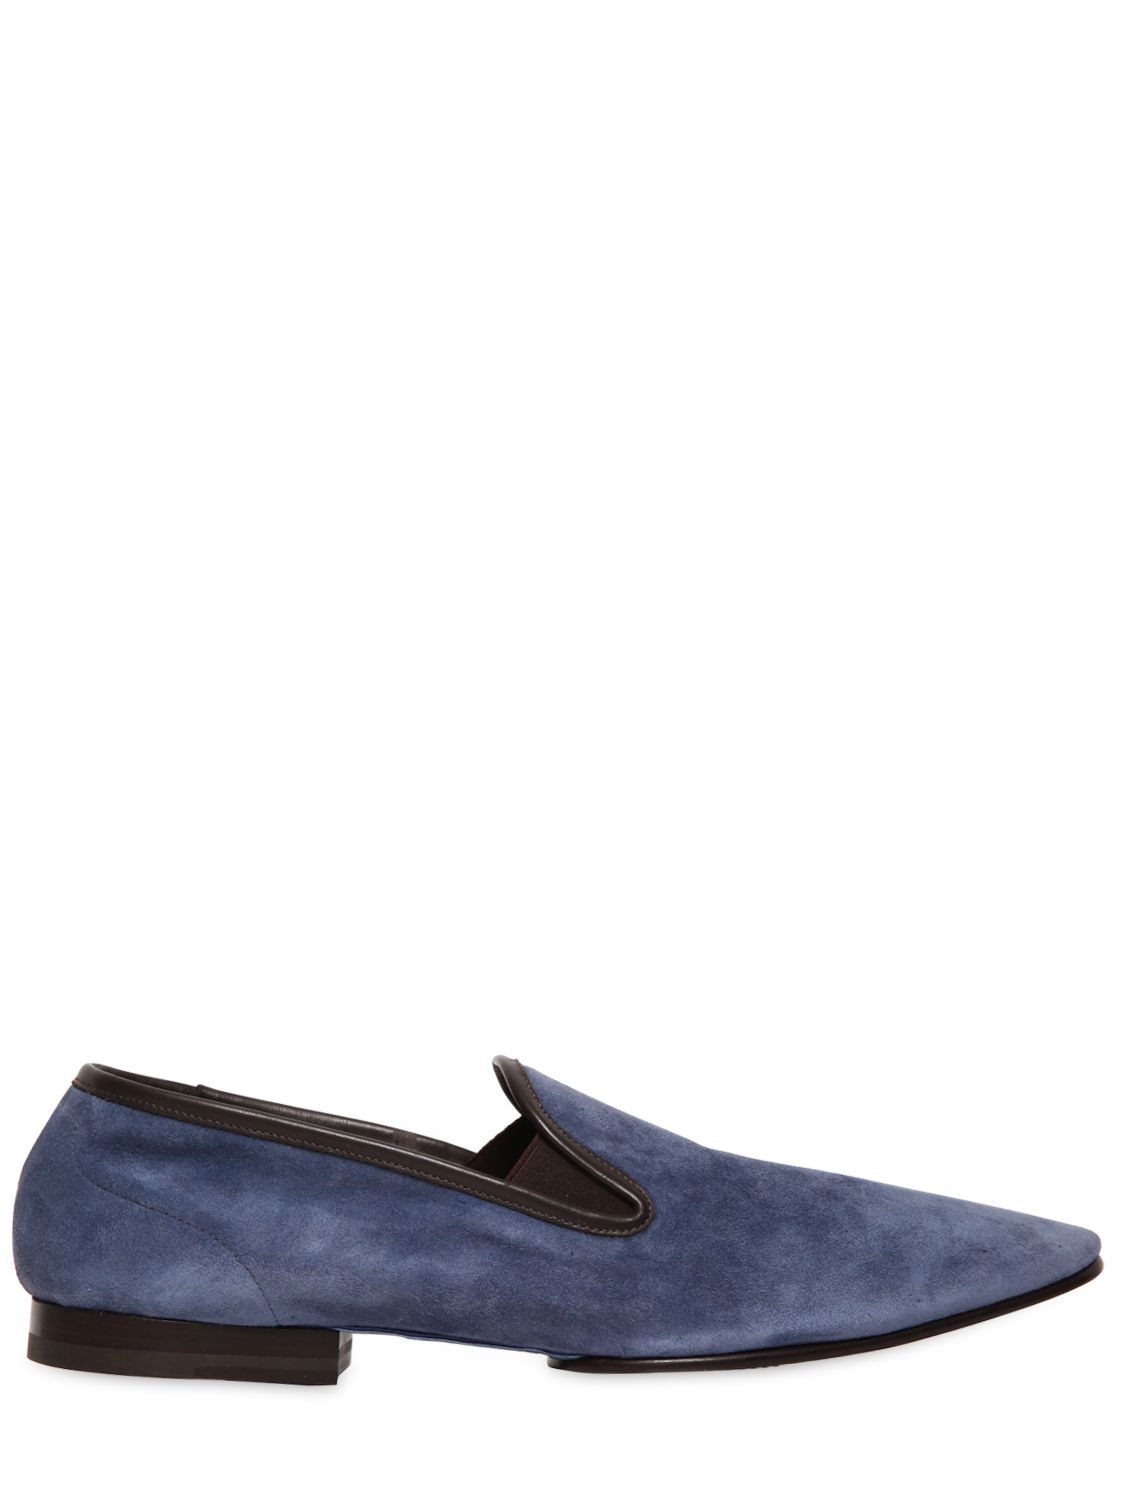 Max Verre Soft Suede Loafers in Blue for Men (LIGHT BLUE) | Lyst